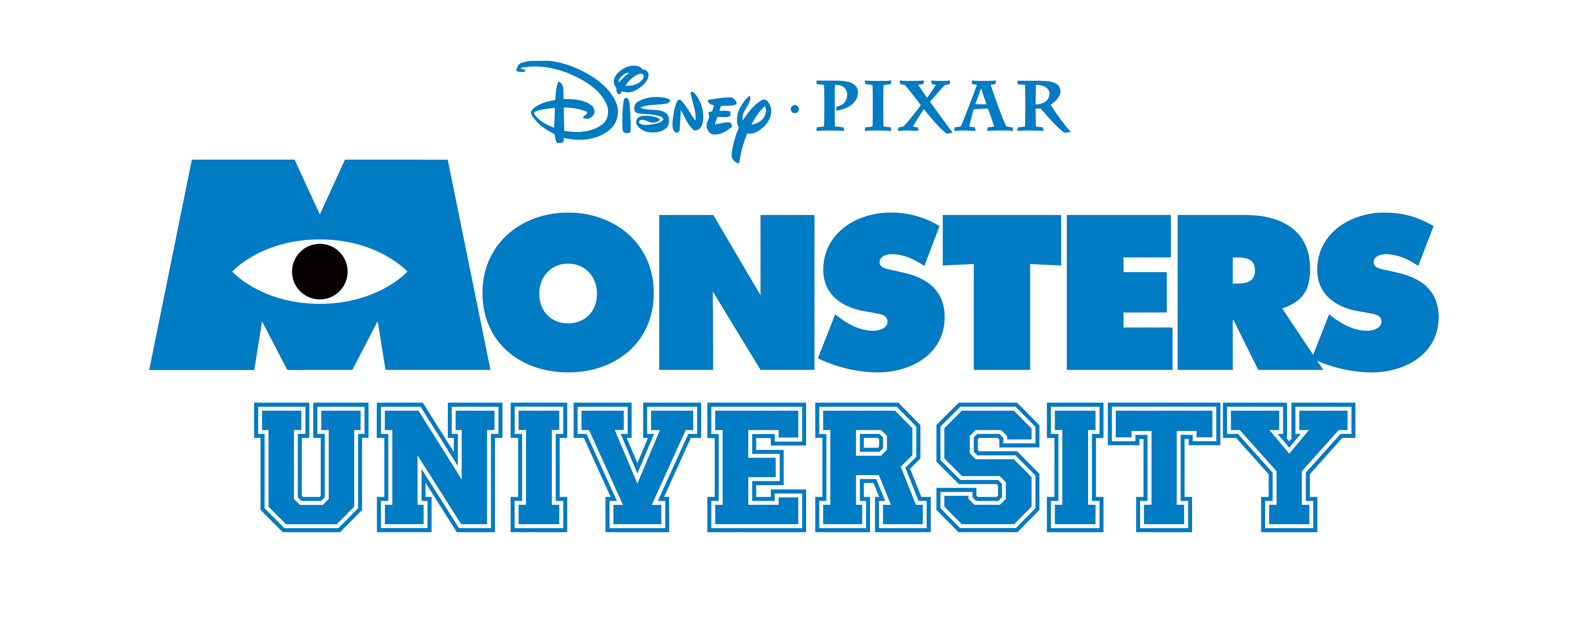 University Acceptance Offers: Brock or Monsters University? | Brock University Student Bloggers